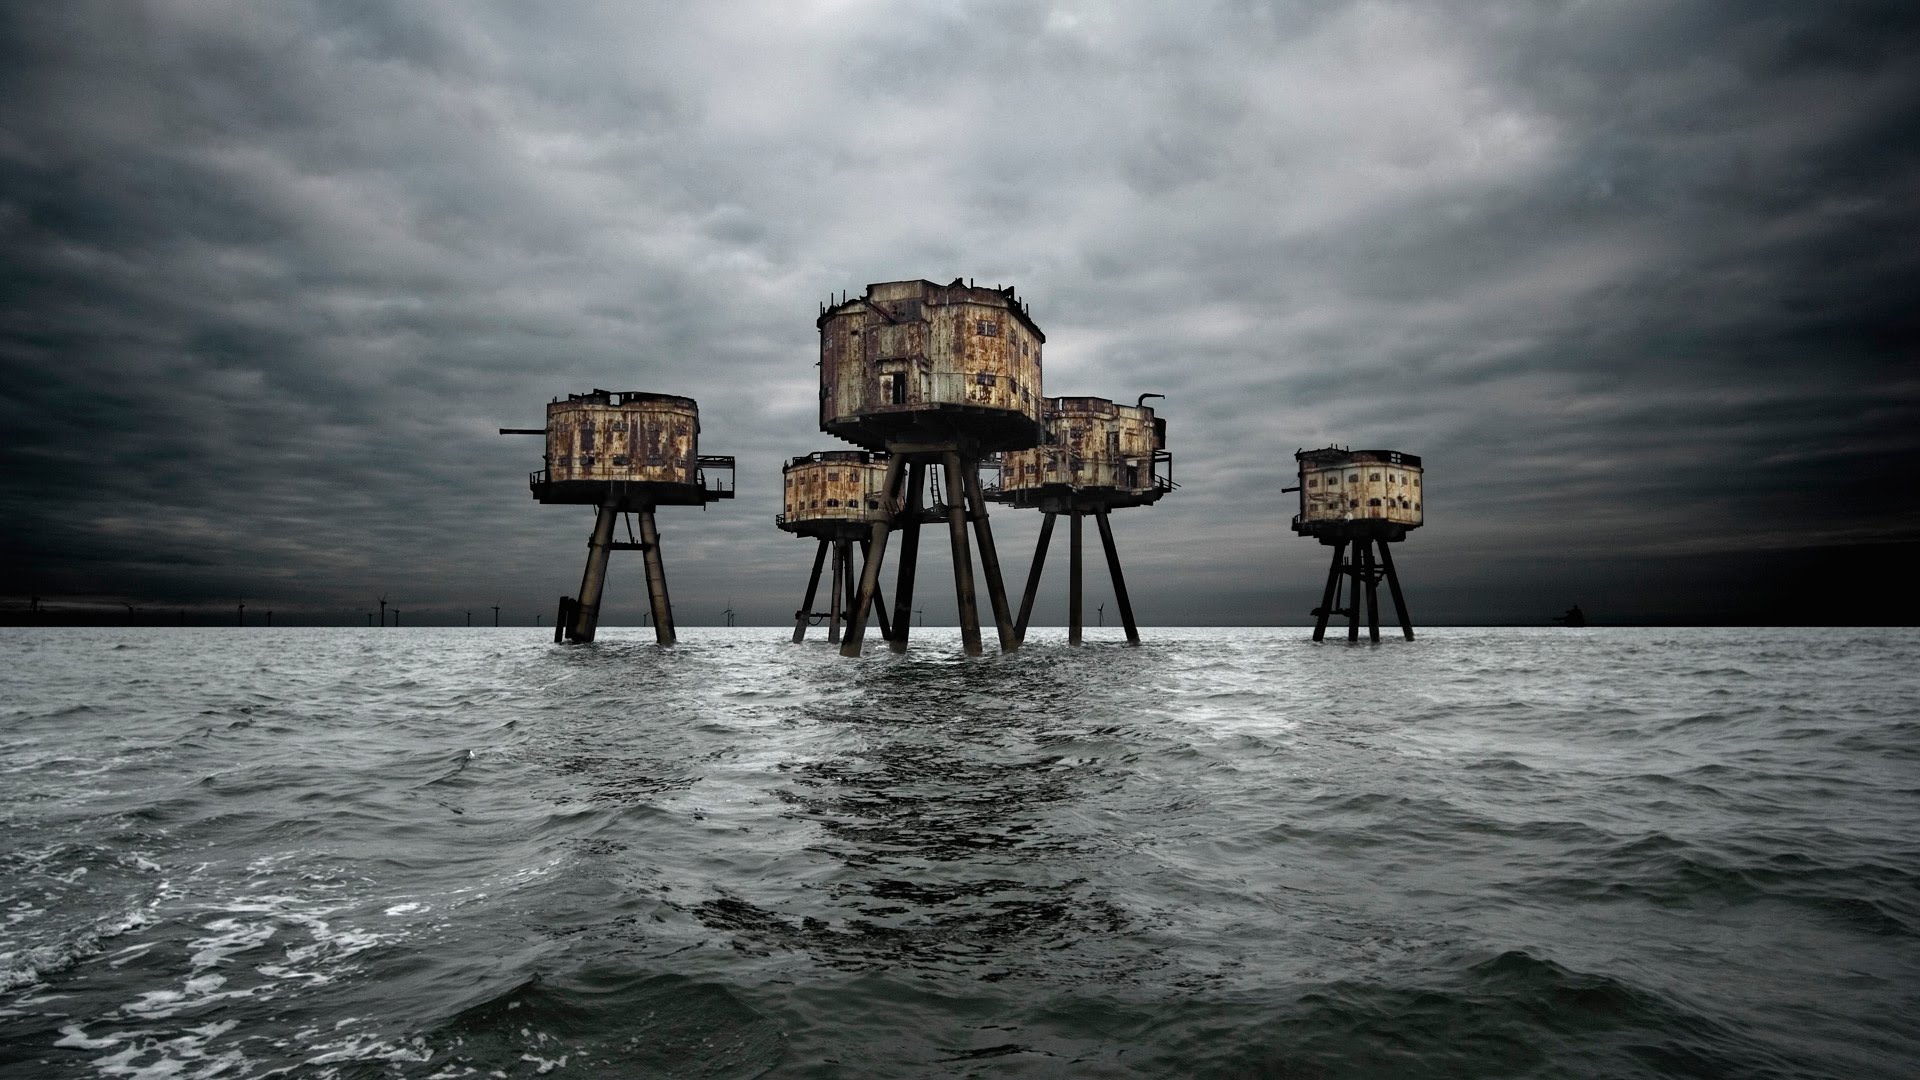 Maunsell Forts in the Thames Estuary, England.jpg